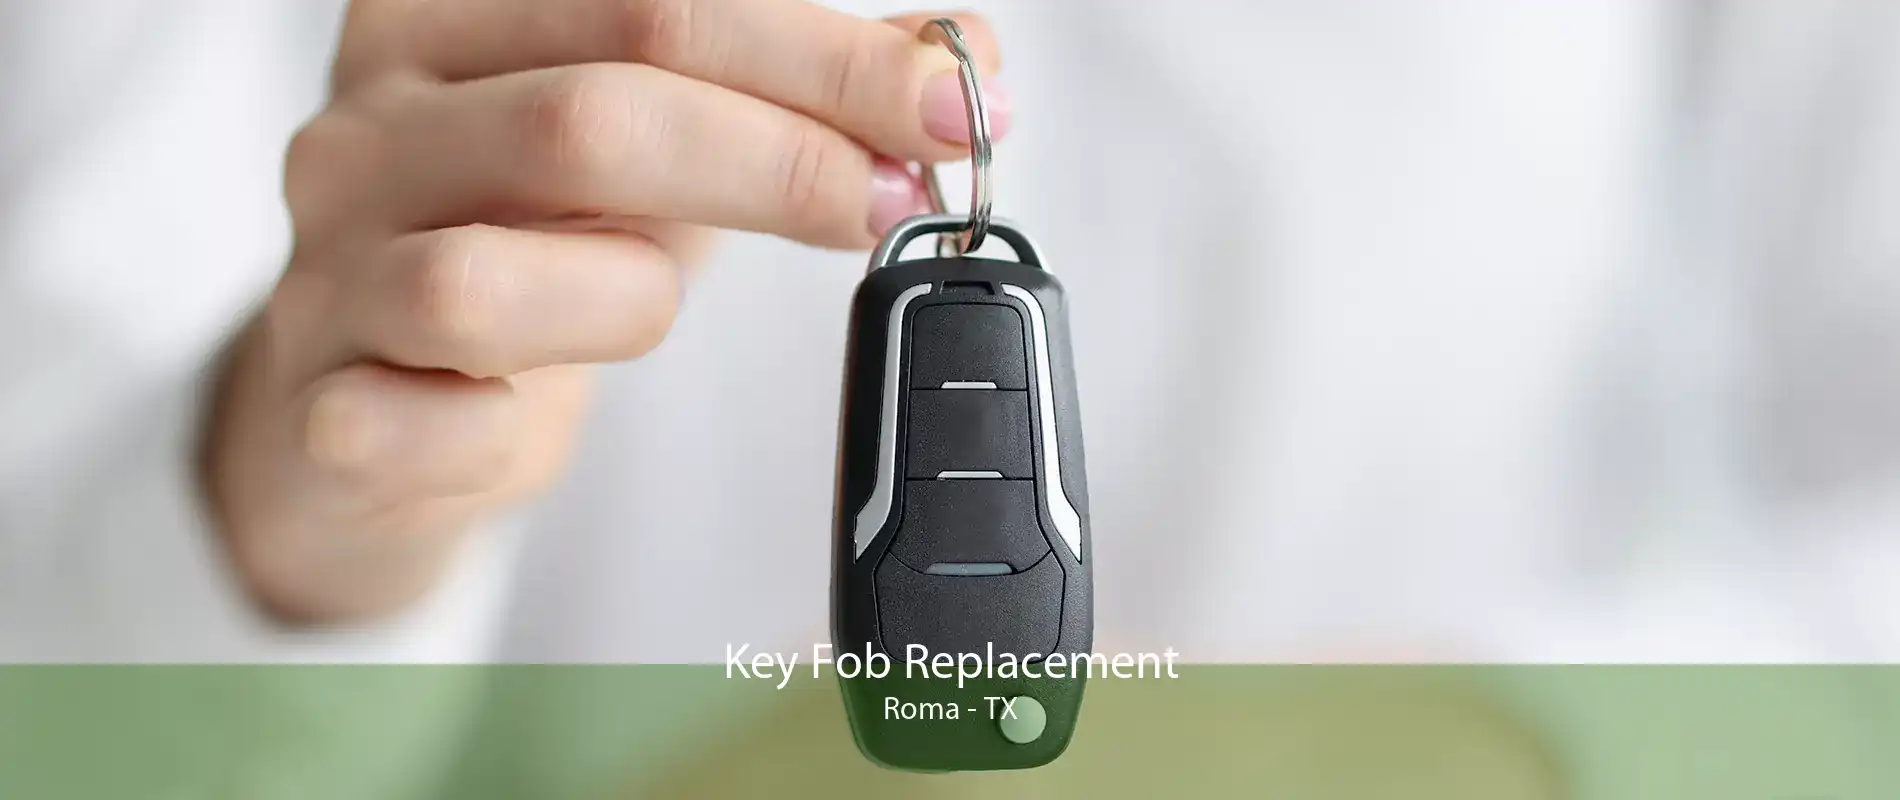 Key Fob Replacement Roma - TX